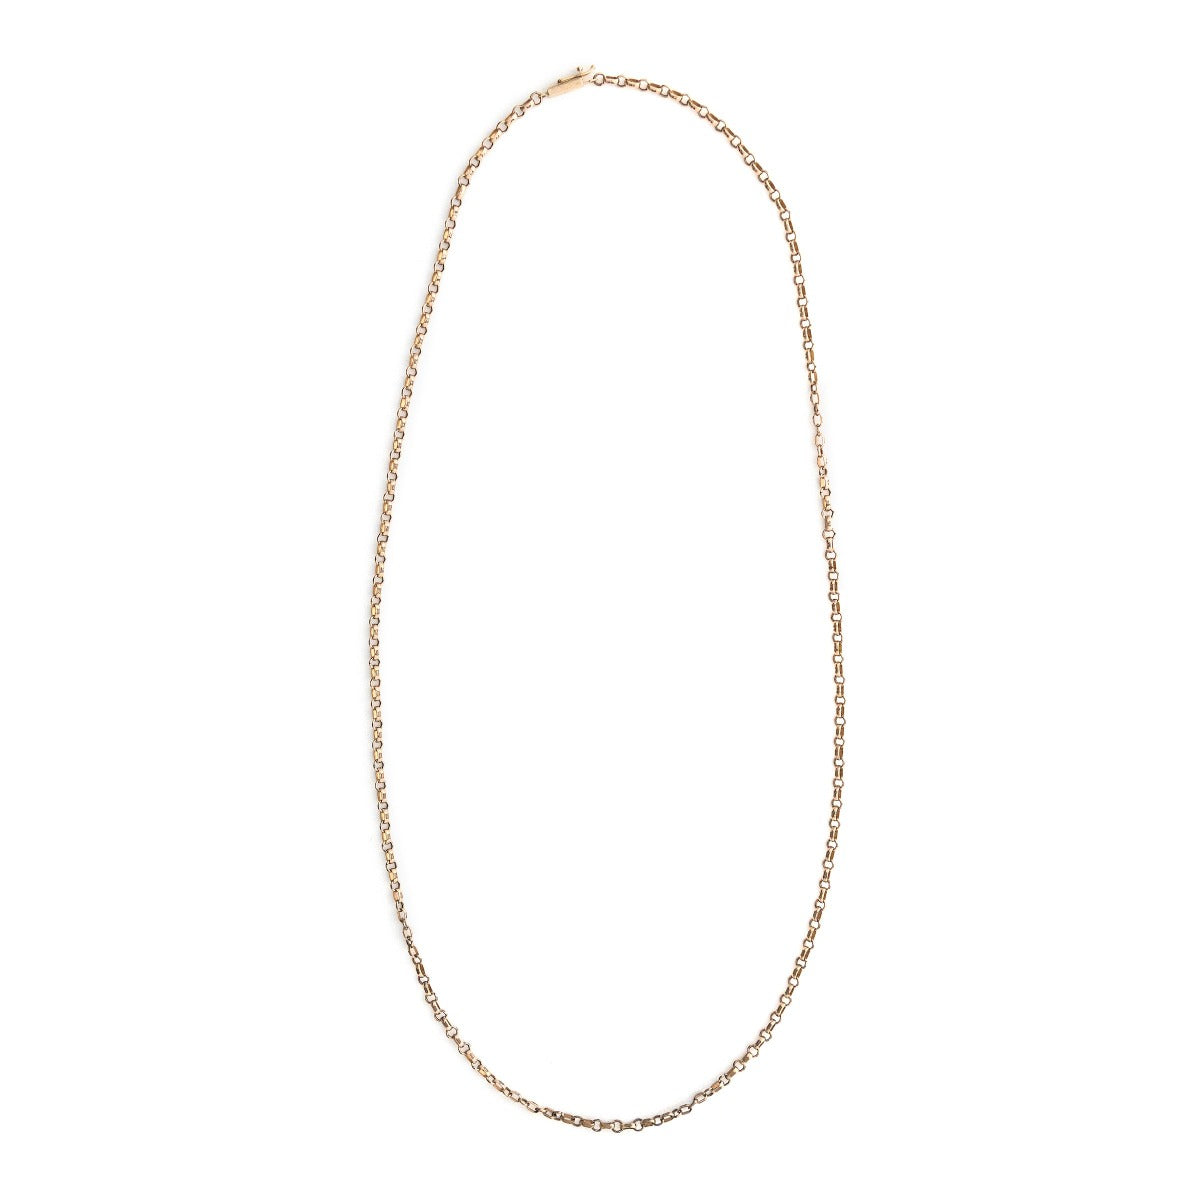 This Victorian cable chain is crafted from rosy 14K gold in a versatile 25" length, and features a barrel clasp.  Paired with one of our antique gold lockets or worn on its own, this necklace will be treasured for generations to come. Close up view showing clasp